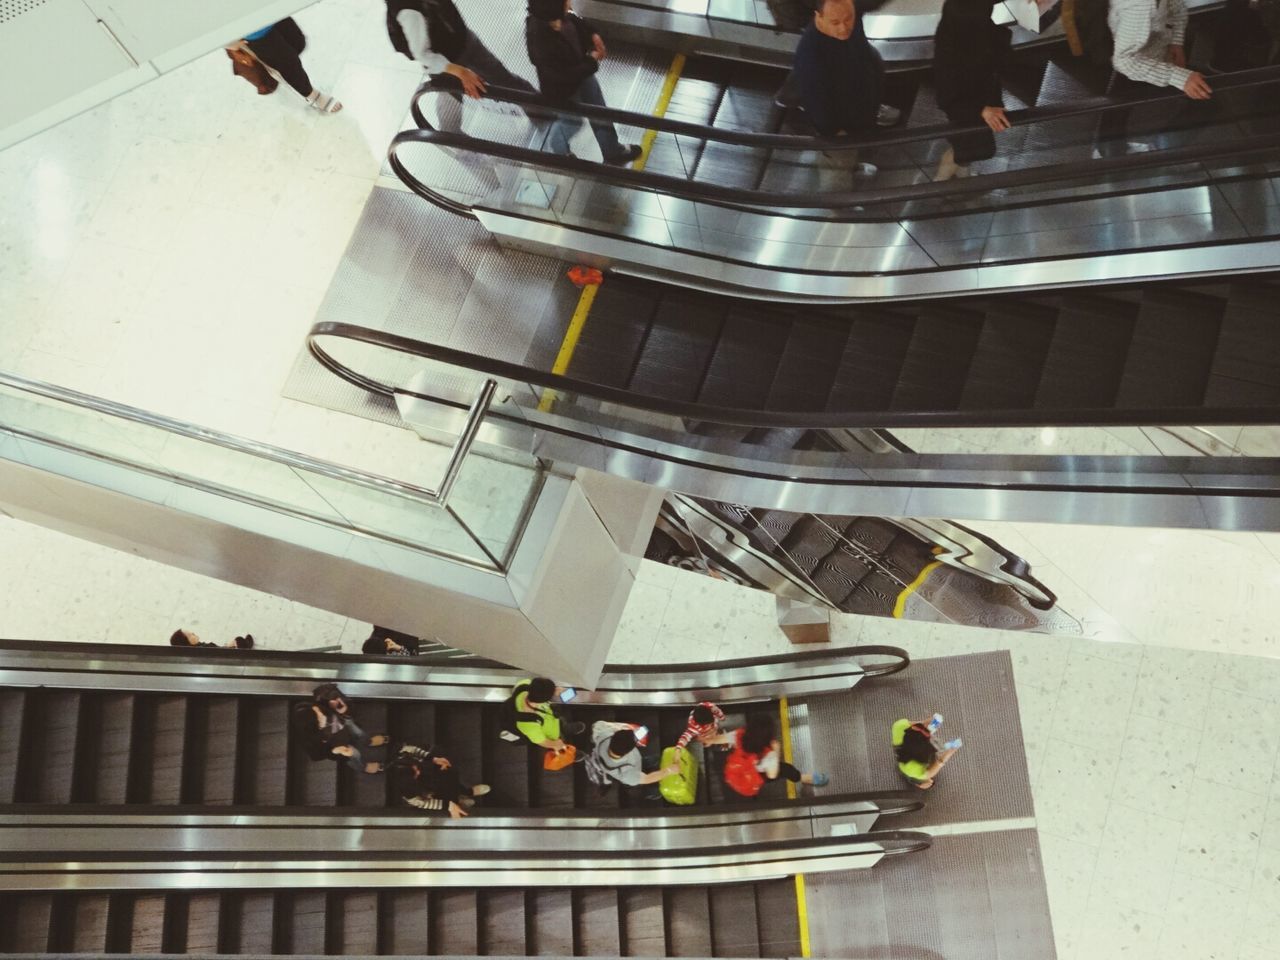 indoors, men, lifestyles, person, high angle view, large group of people, leisure activity, walking, medium group of people, standing, escalator, steps, city life, shopping, staircase, steps and staircases, tiled floor, shopping mall, railing